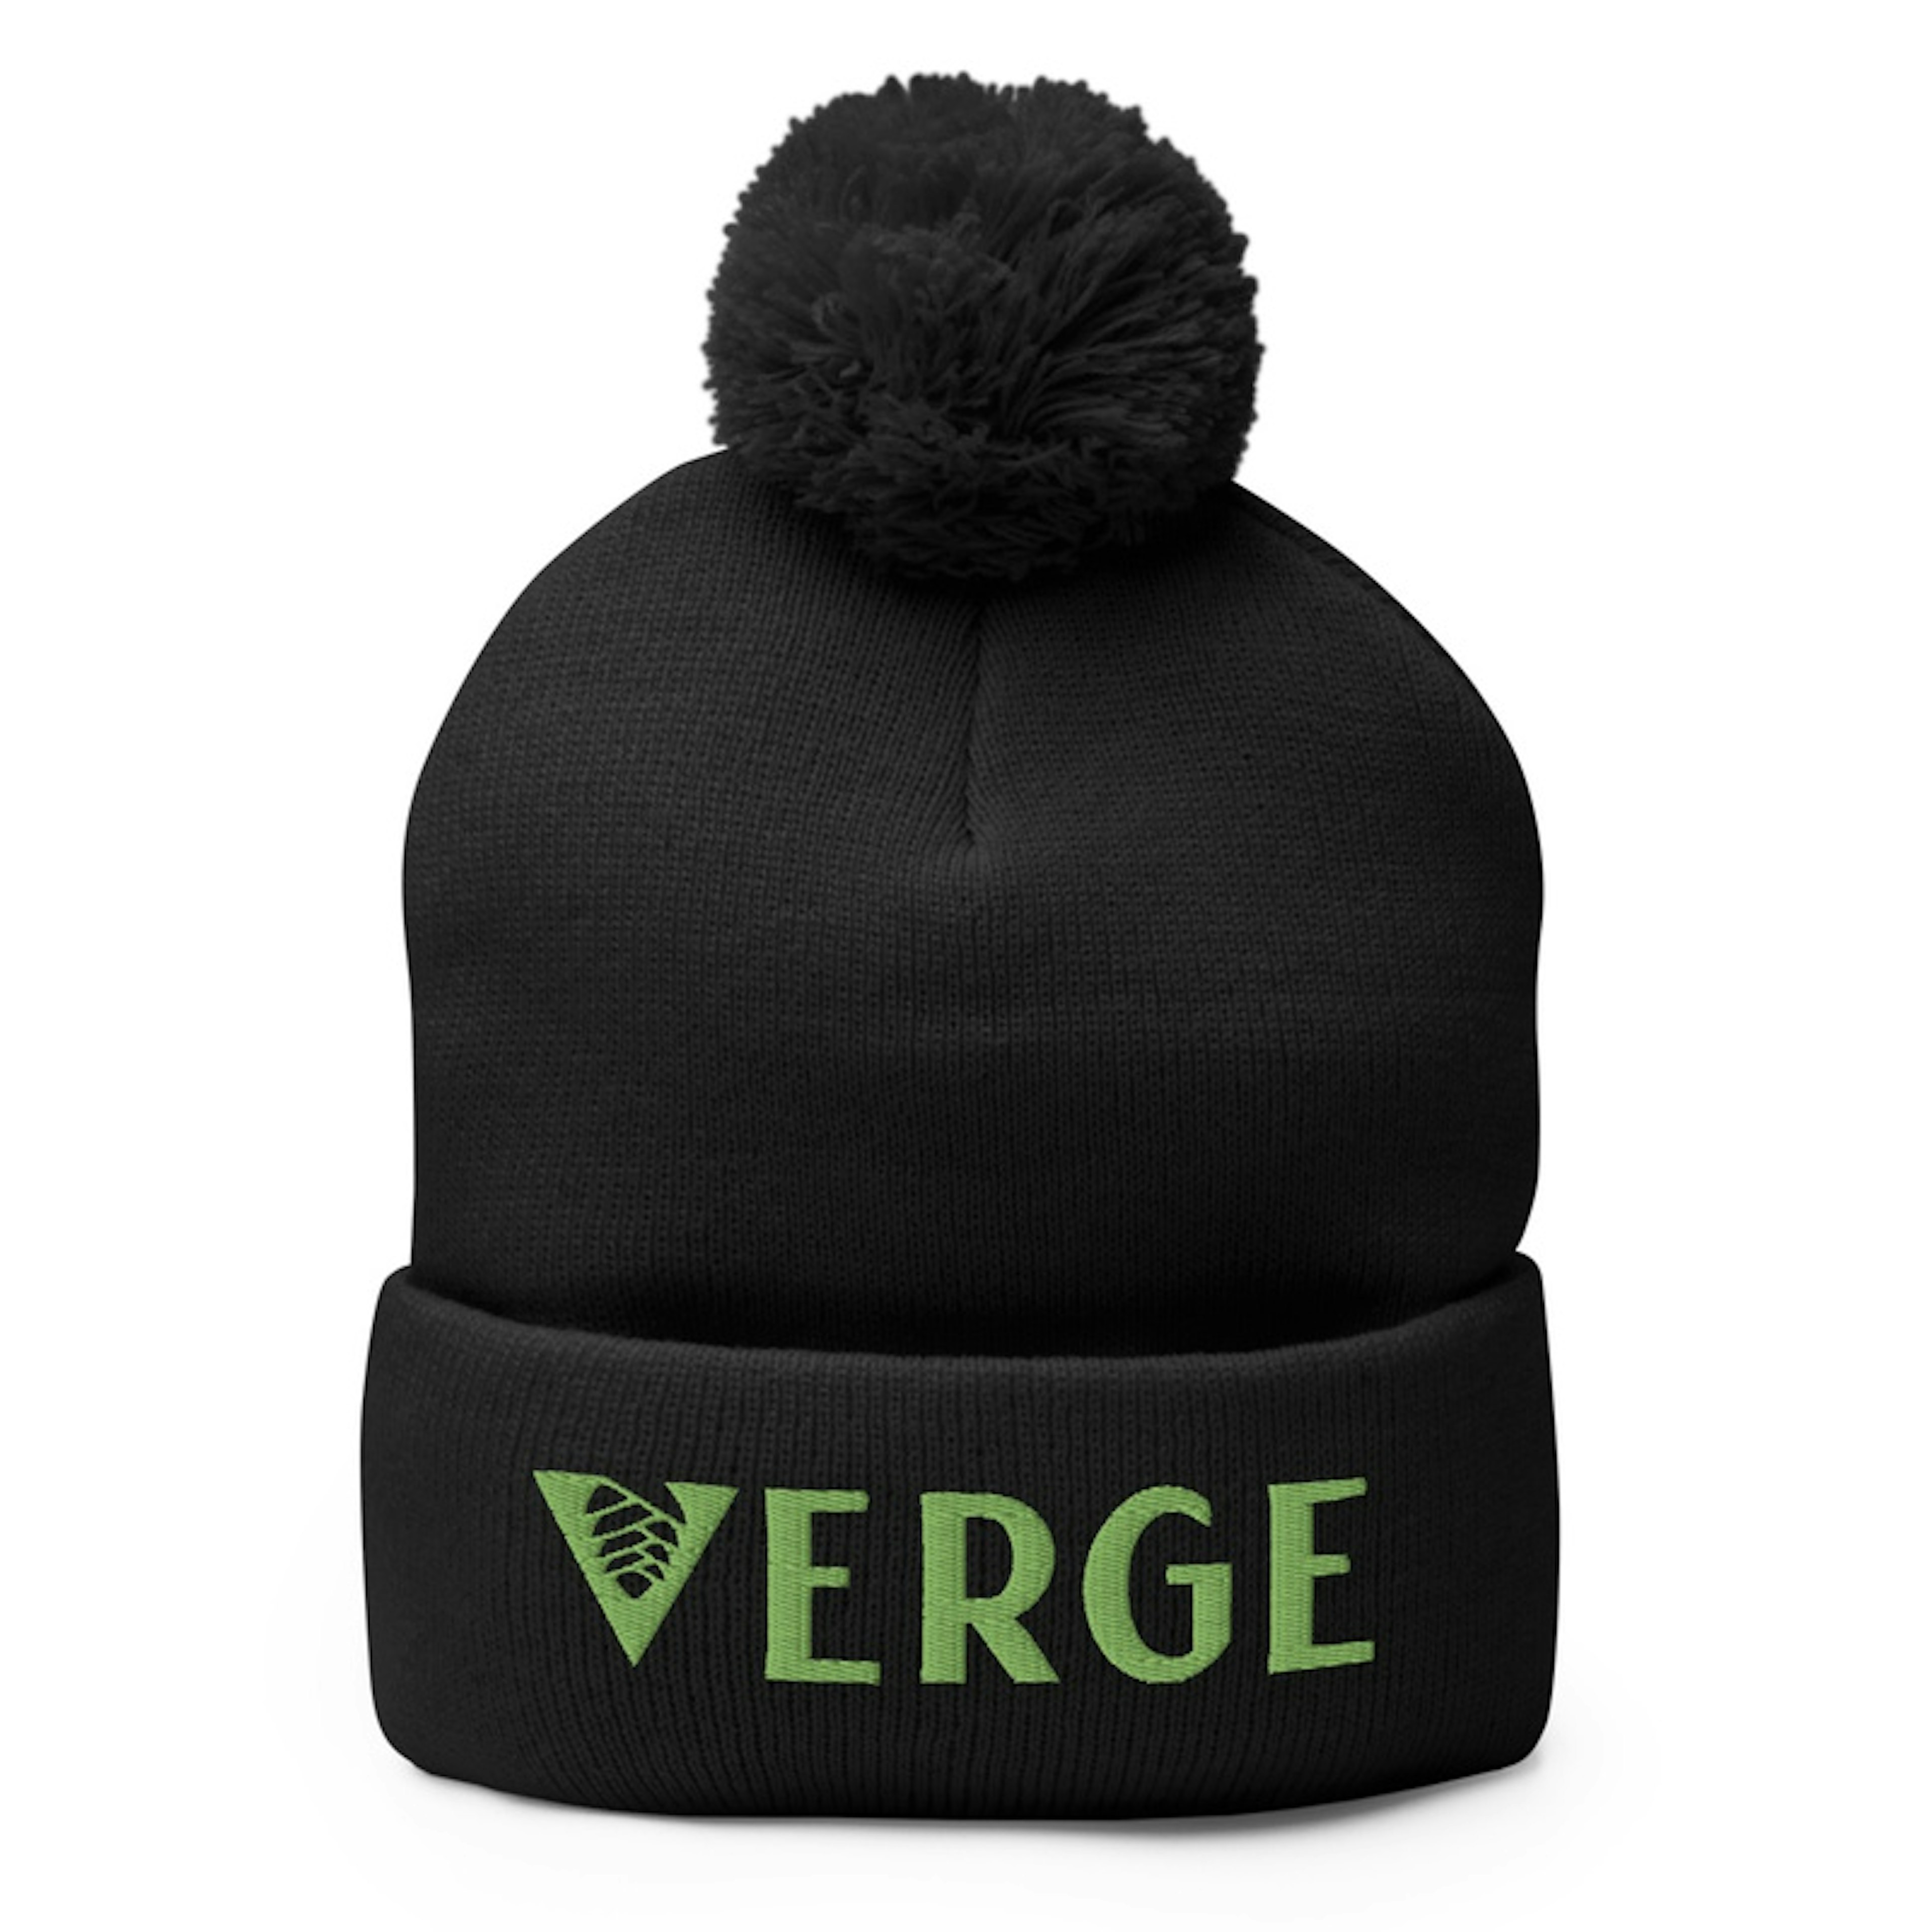 Verge Permaculture Hat